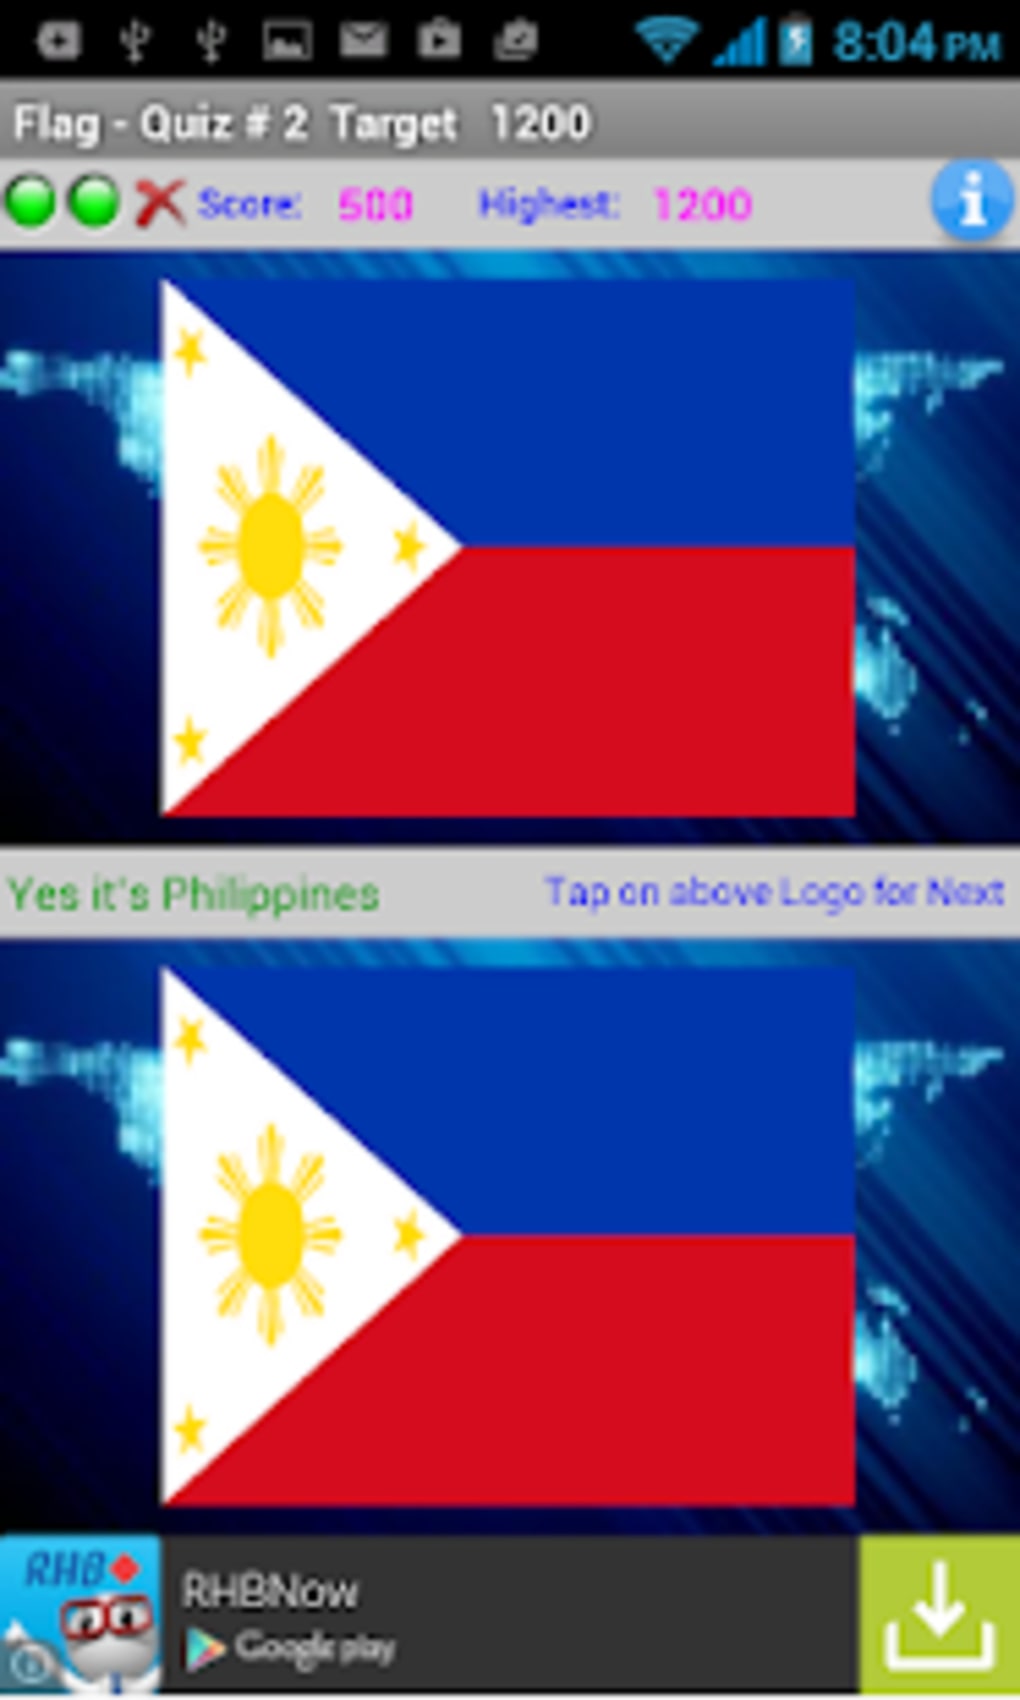 Flags Quiz - Apps on Google Play